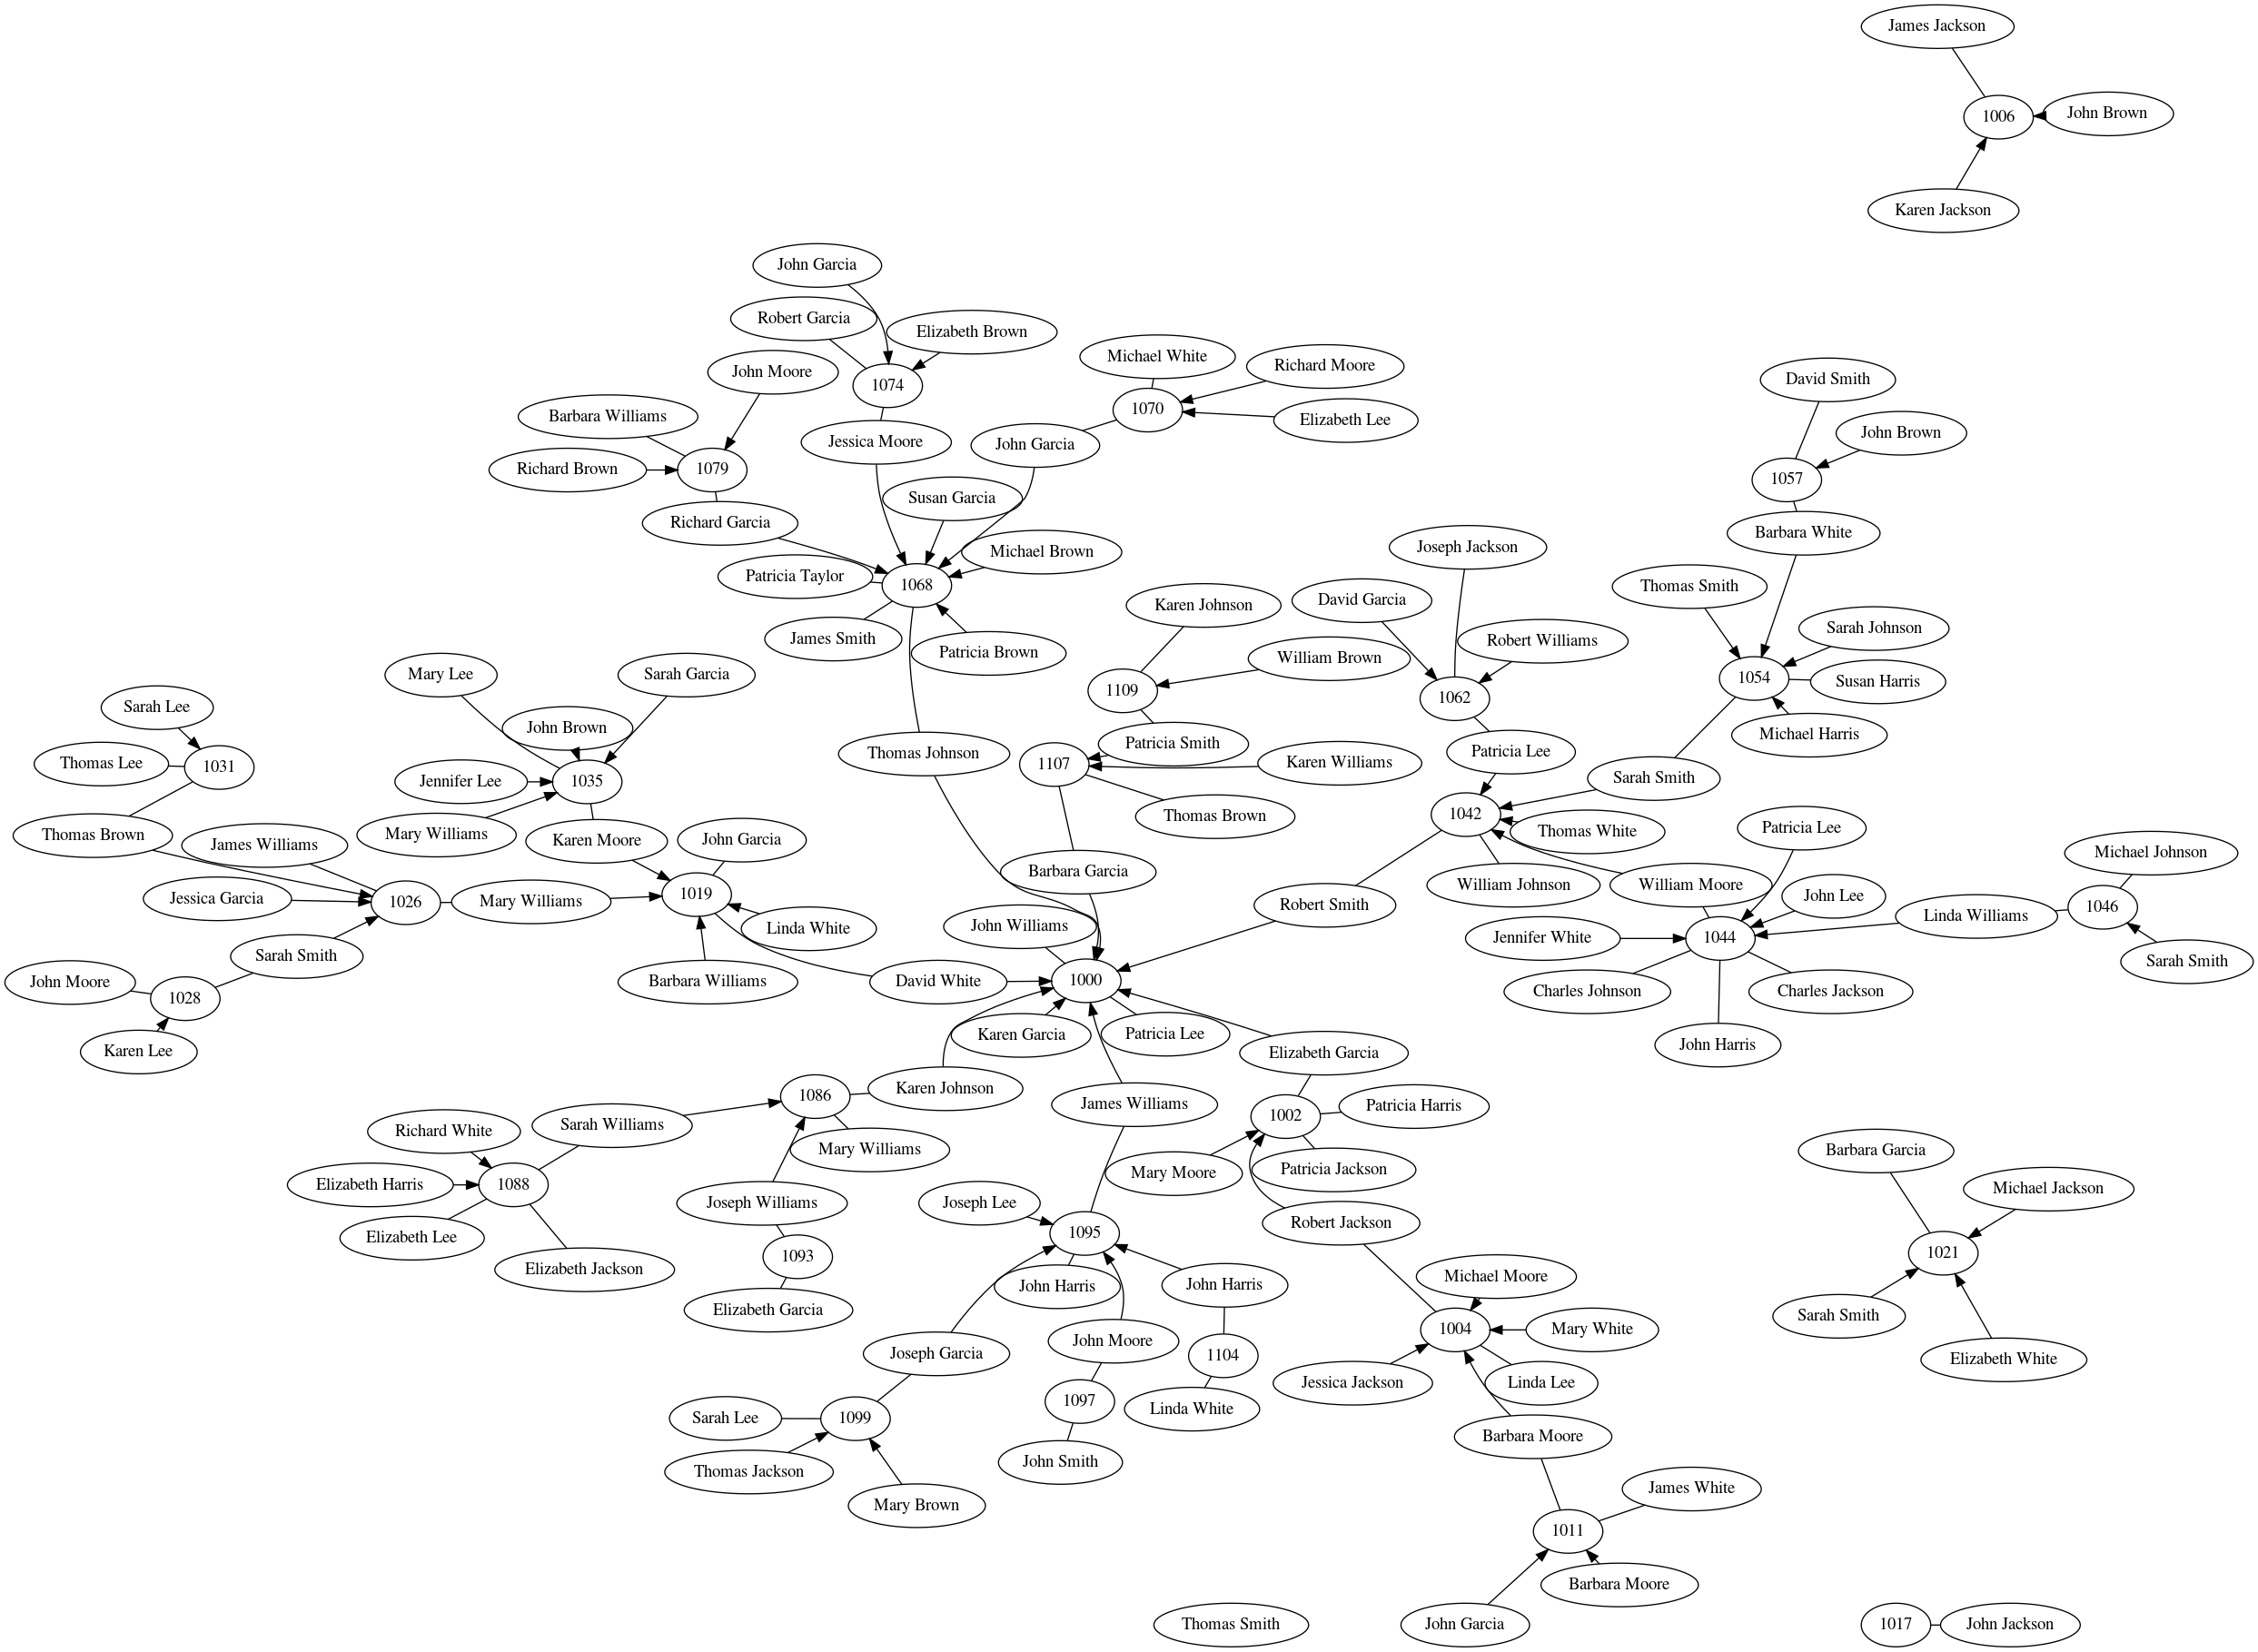 Ugly graph with all family names pointing at each other